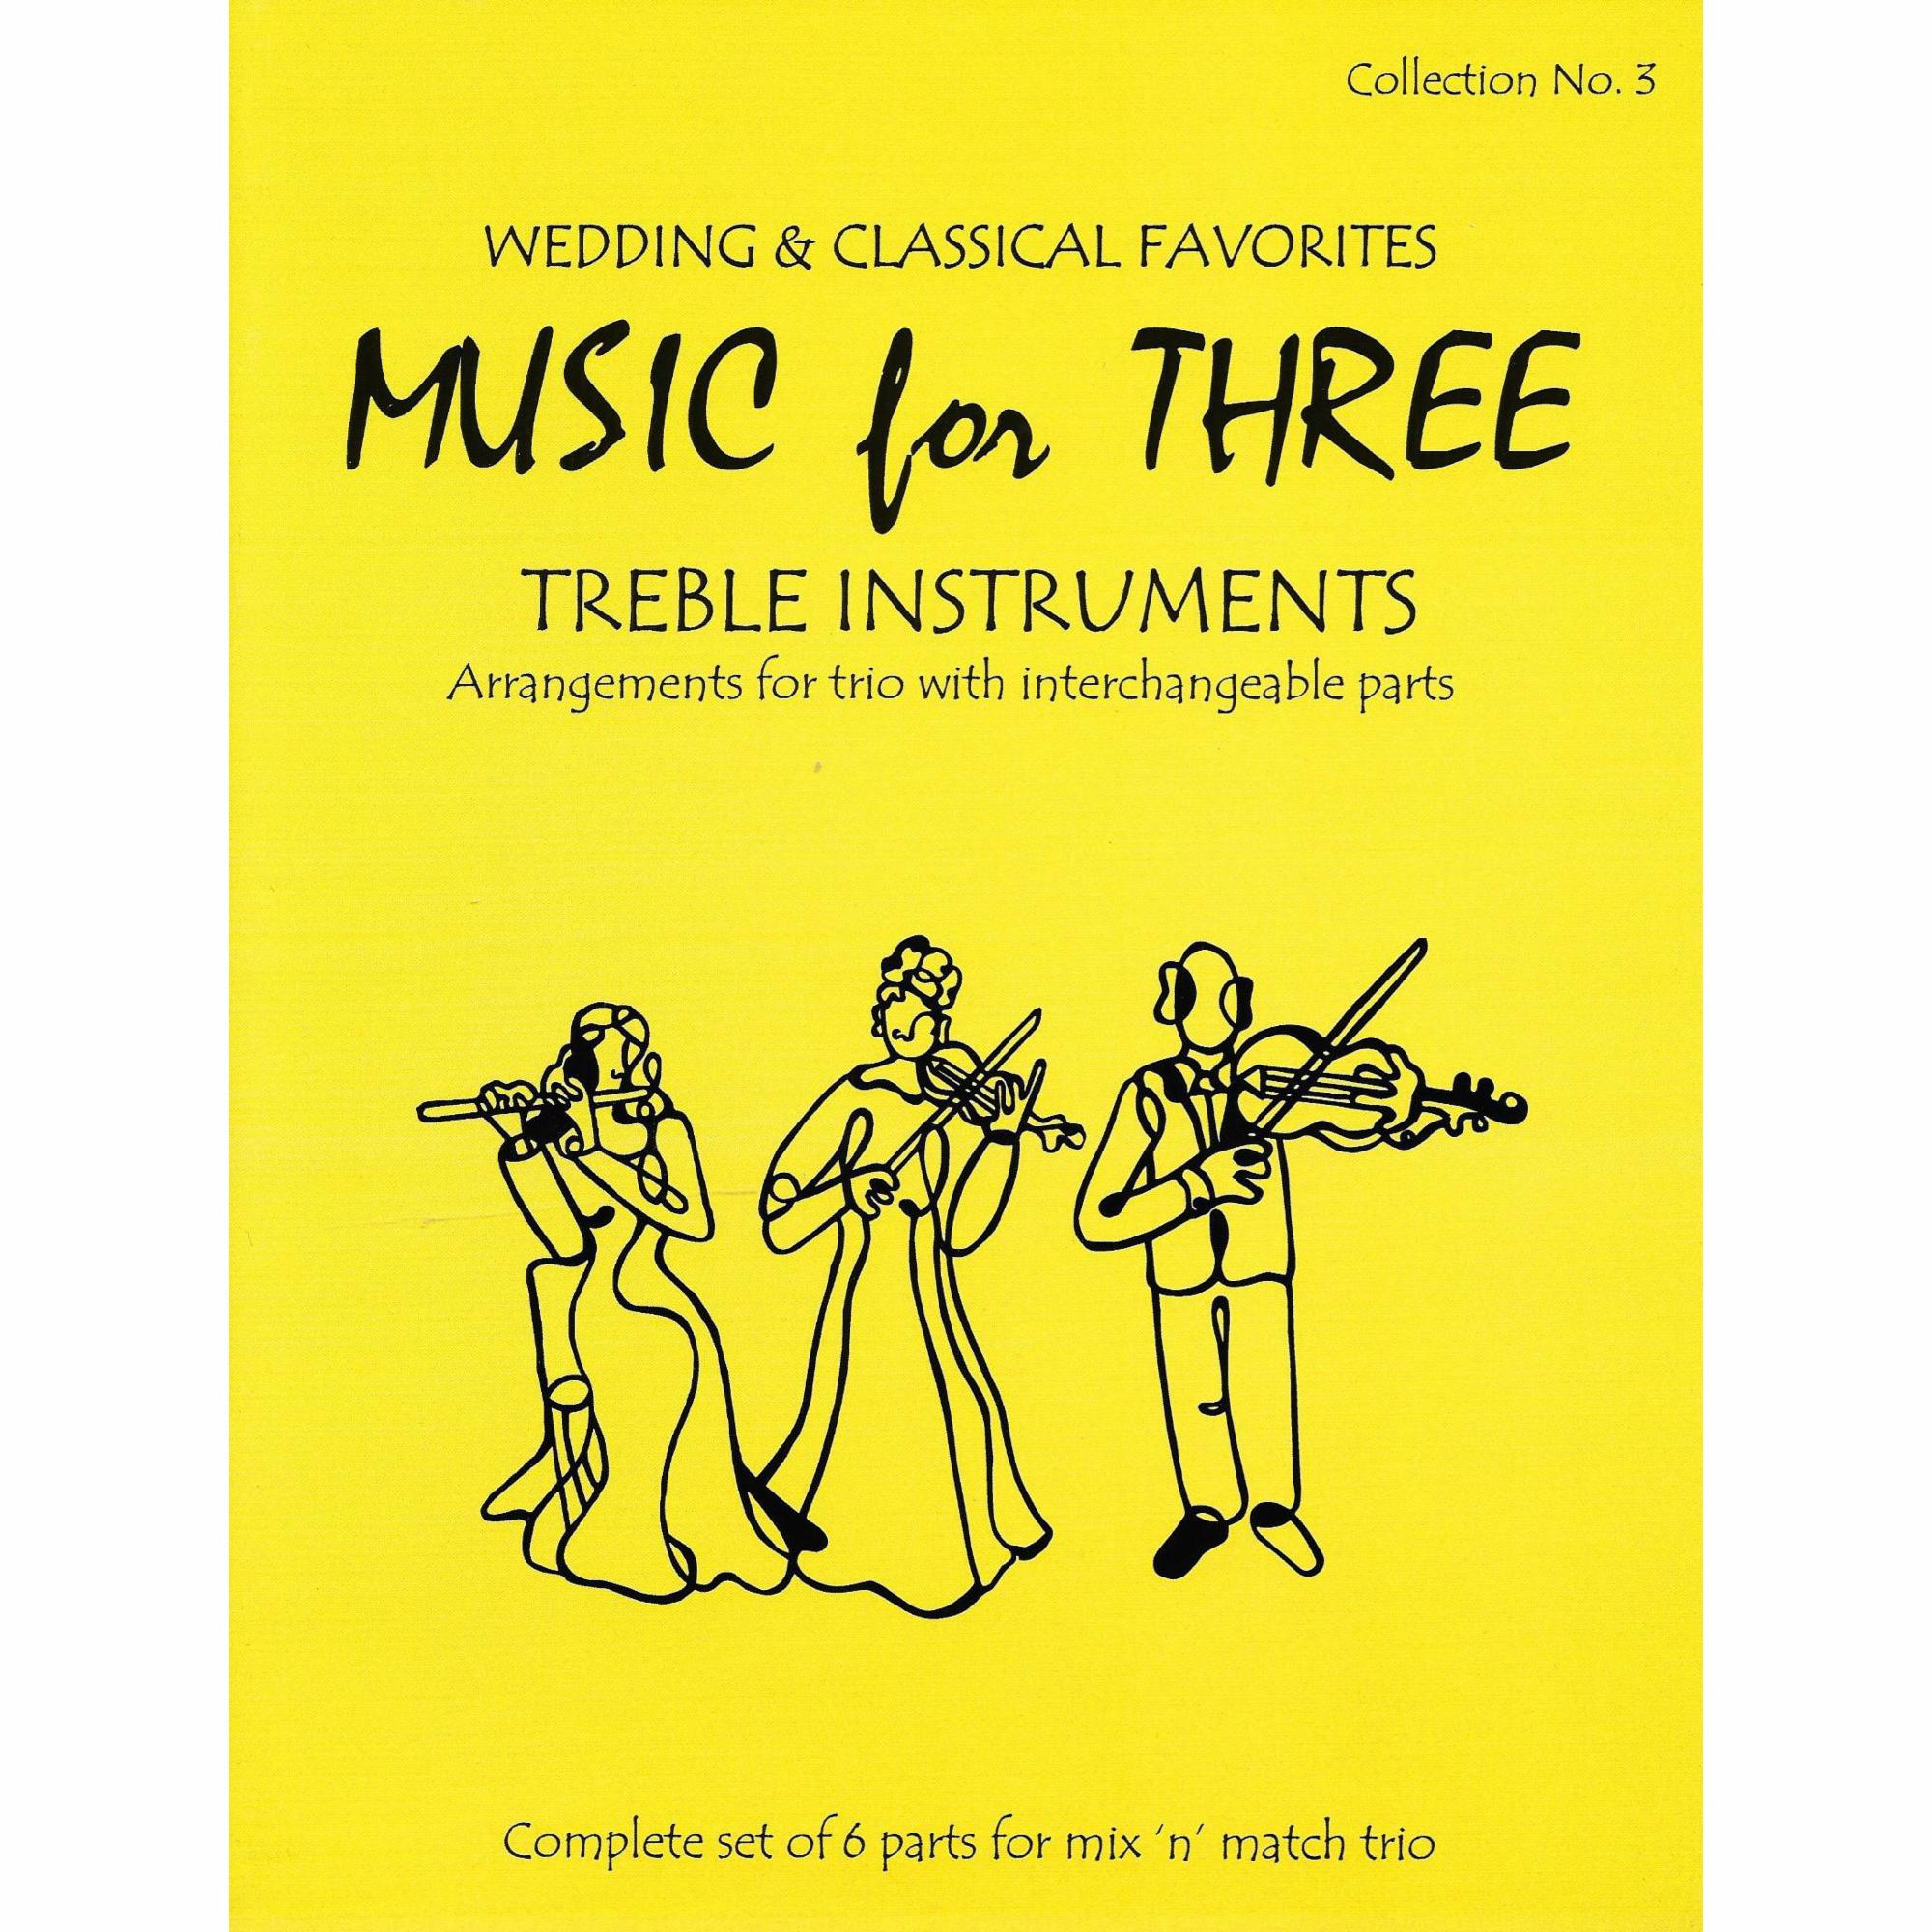 Music for Three Treble Instruments, Collection 3